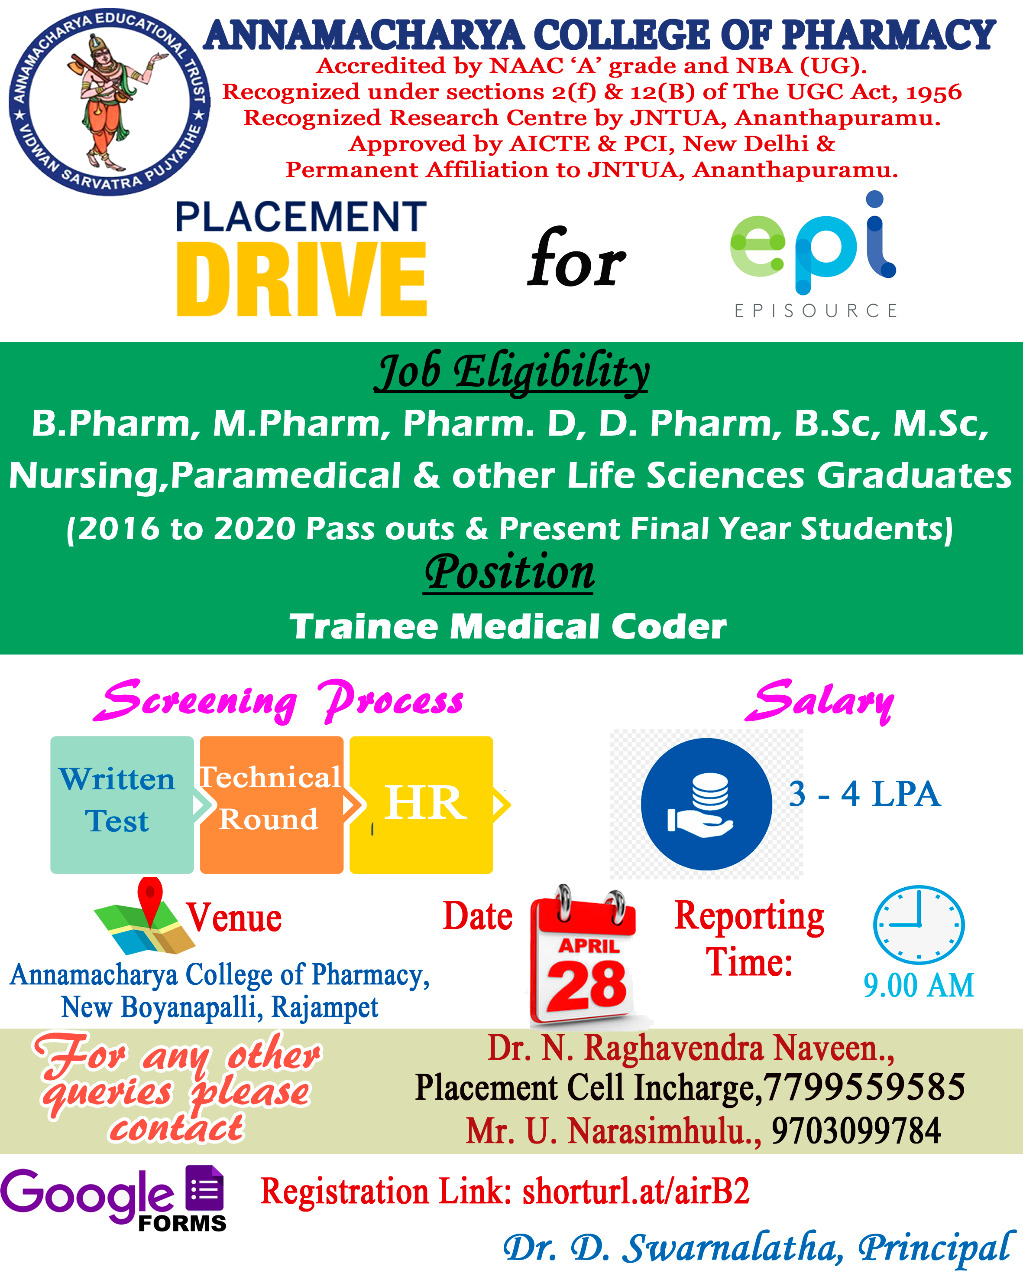 POOL CAMPUS PLACEMENT DRIVE AT ANCP